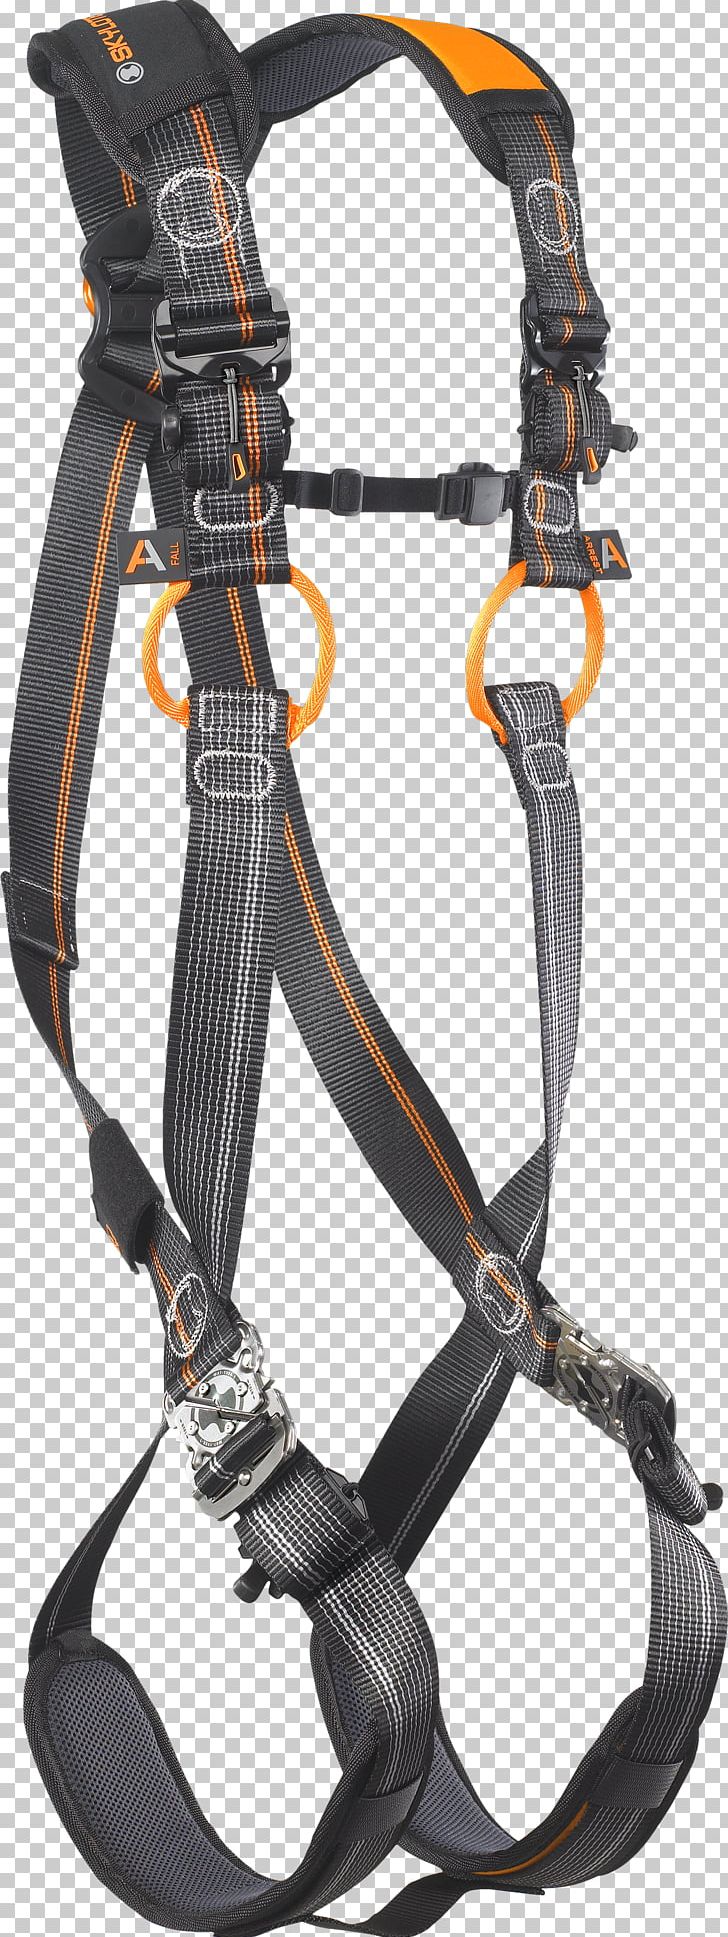 Safety Harness Personal Protective Equipment Fall Protection Fall Arrest SKYLOTEC PNG, Clipart, Architectural Engineering, Business, Climbing Harness, Climbing Harnesses, Fall Arrest Free PNG Download